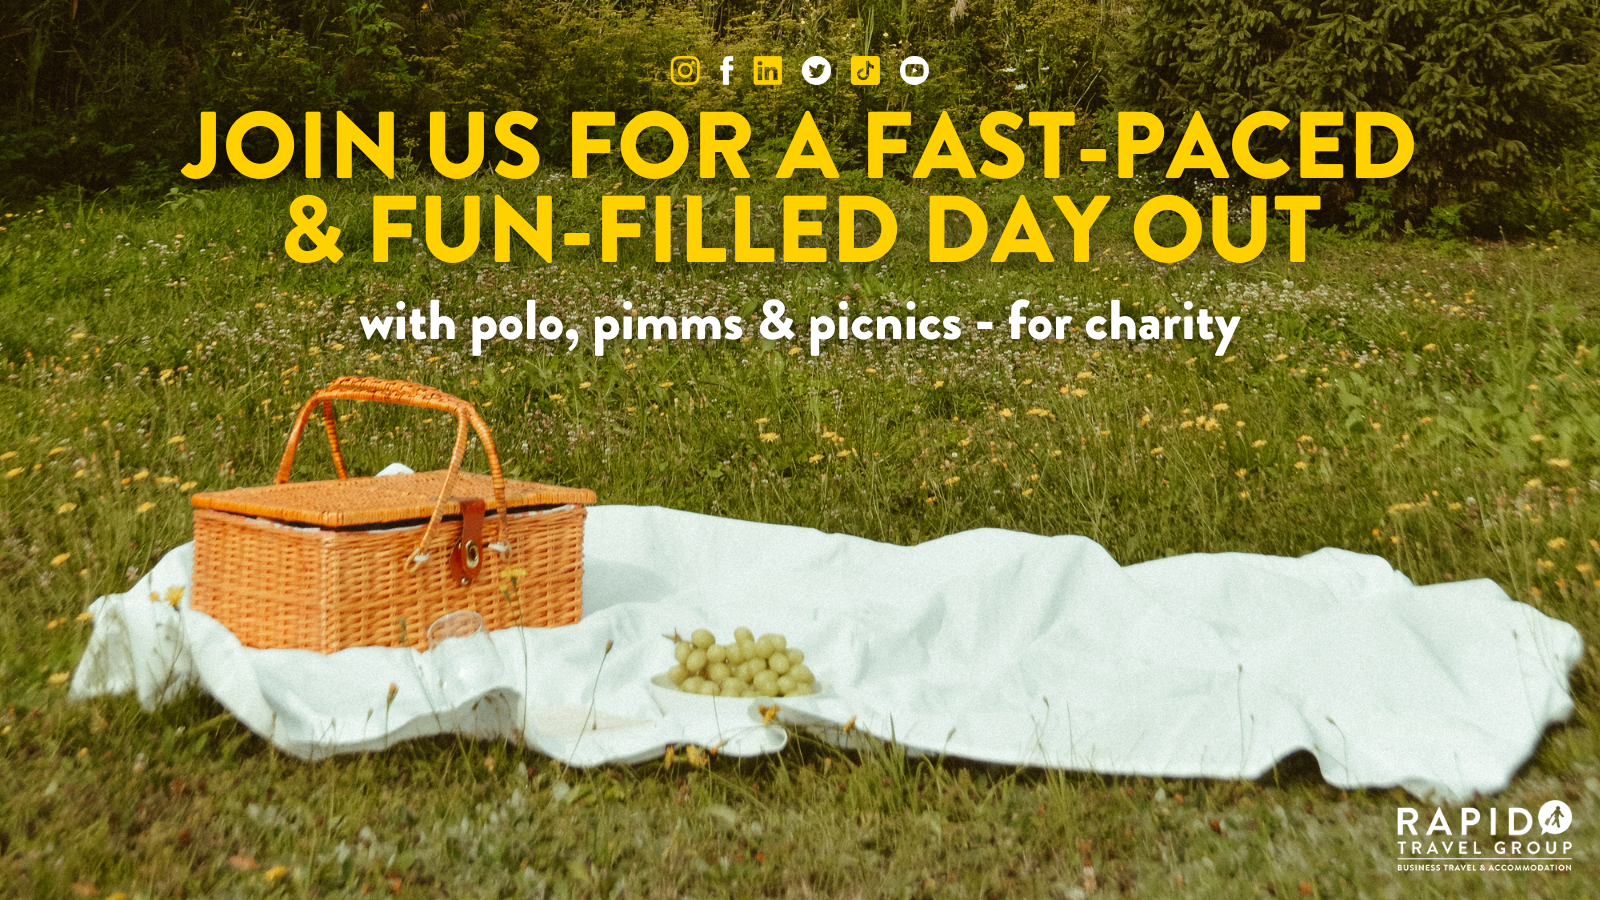 Join us for a fast-paces and fun-filled day out with polo, pimms and picnics - for charity